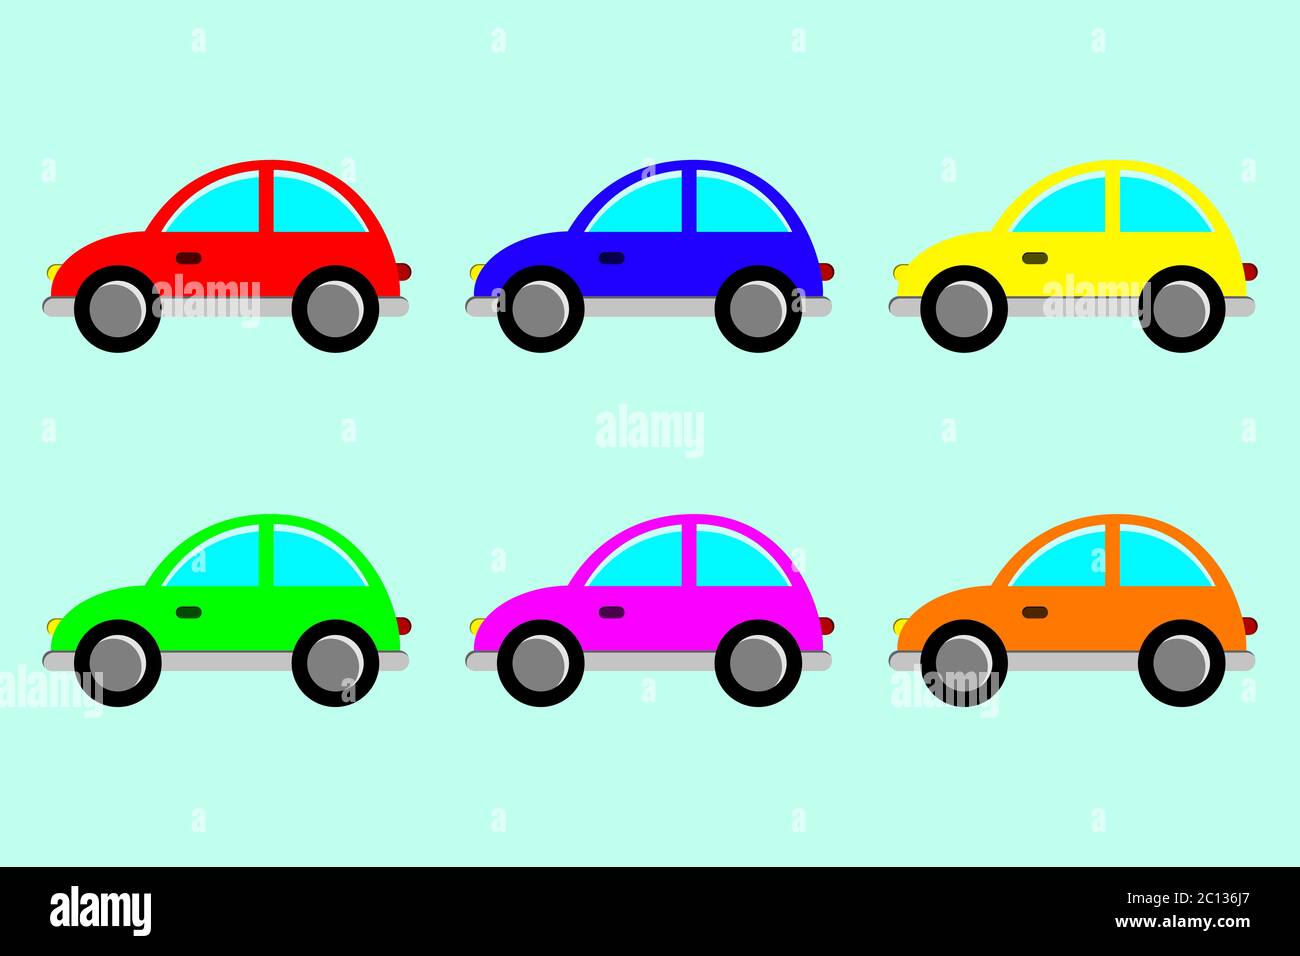 6 round shaped cars in 6 different colors - flat design Stock Vector